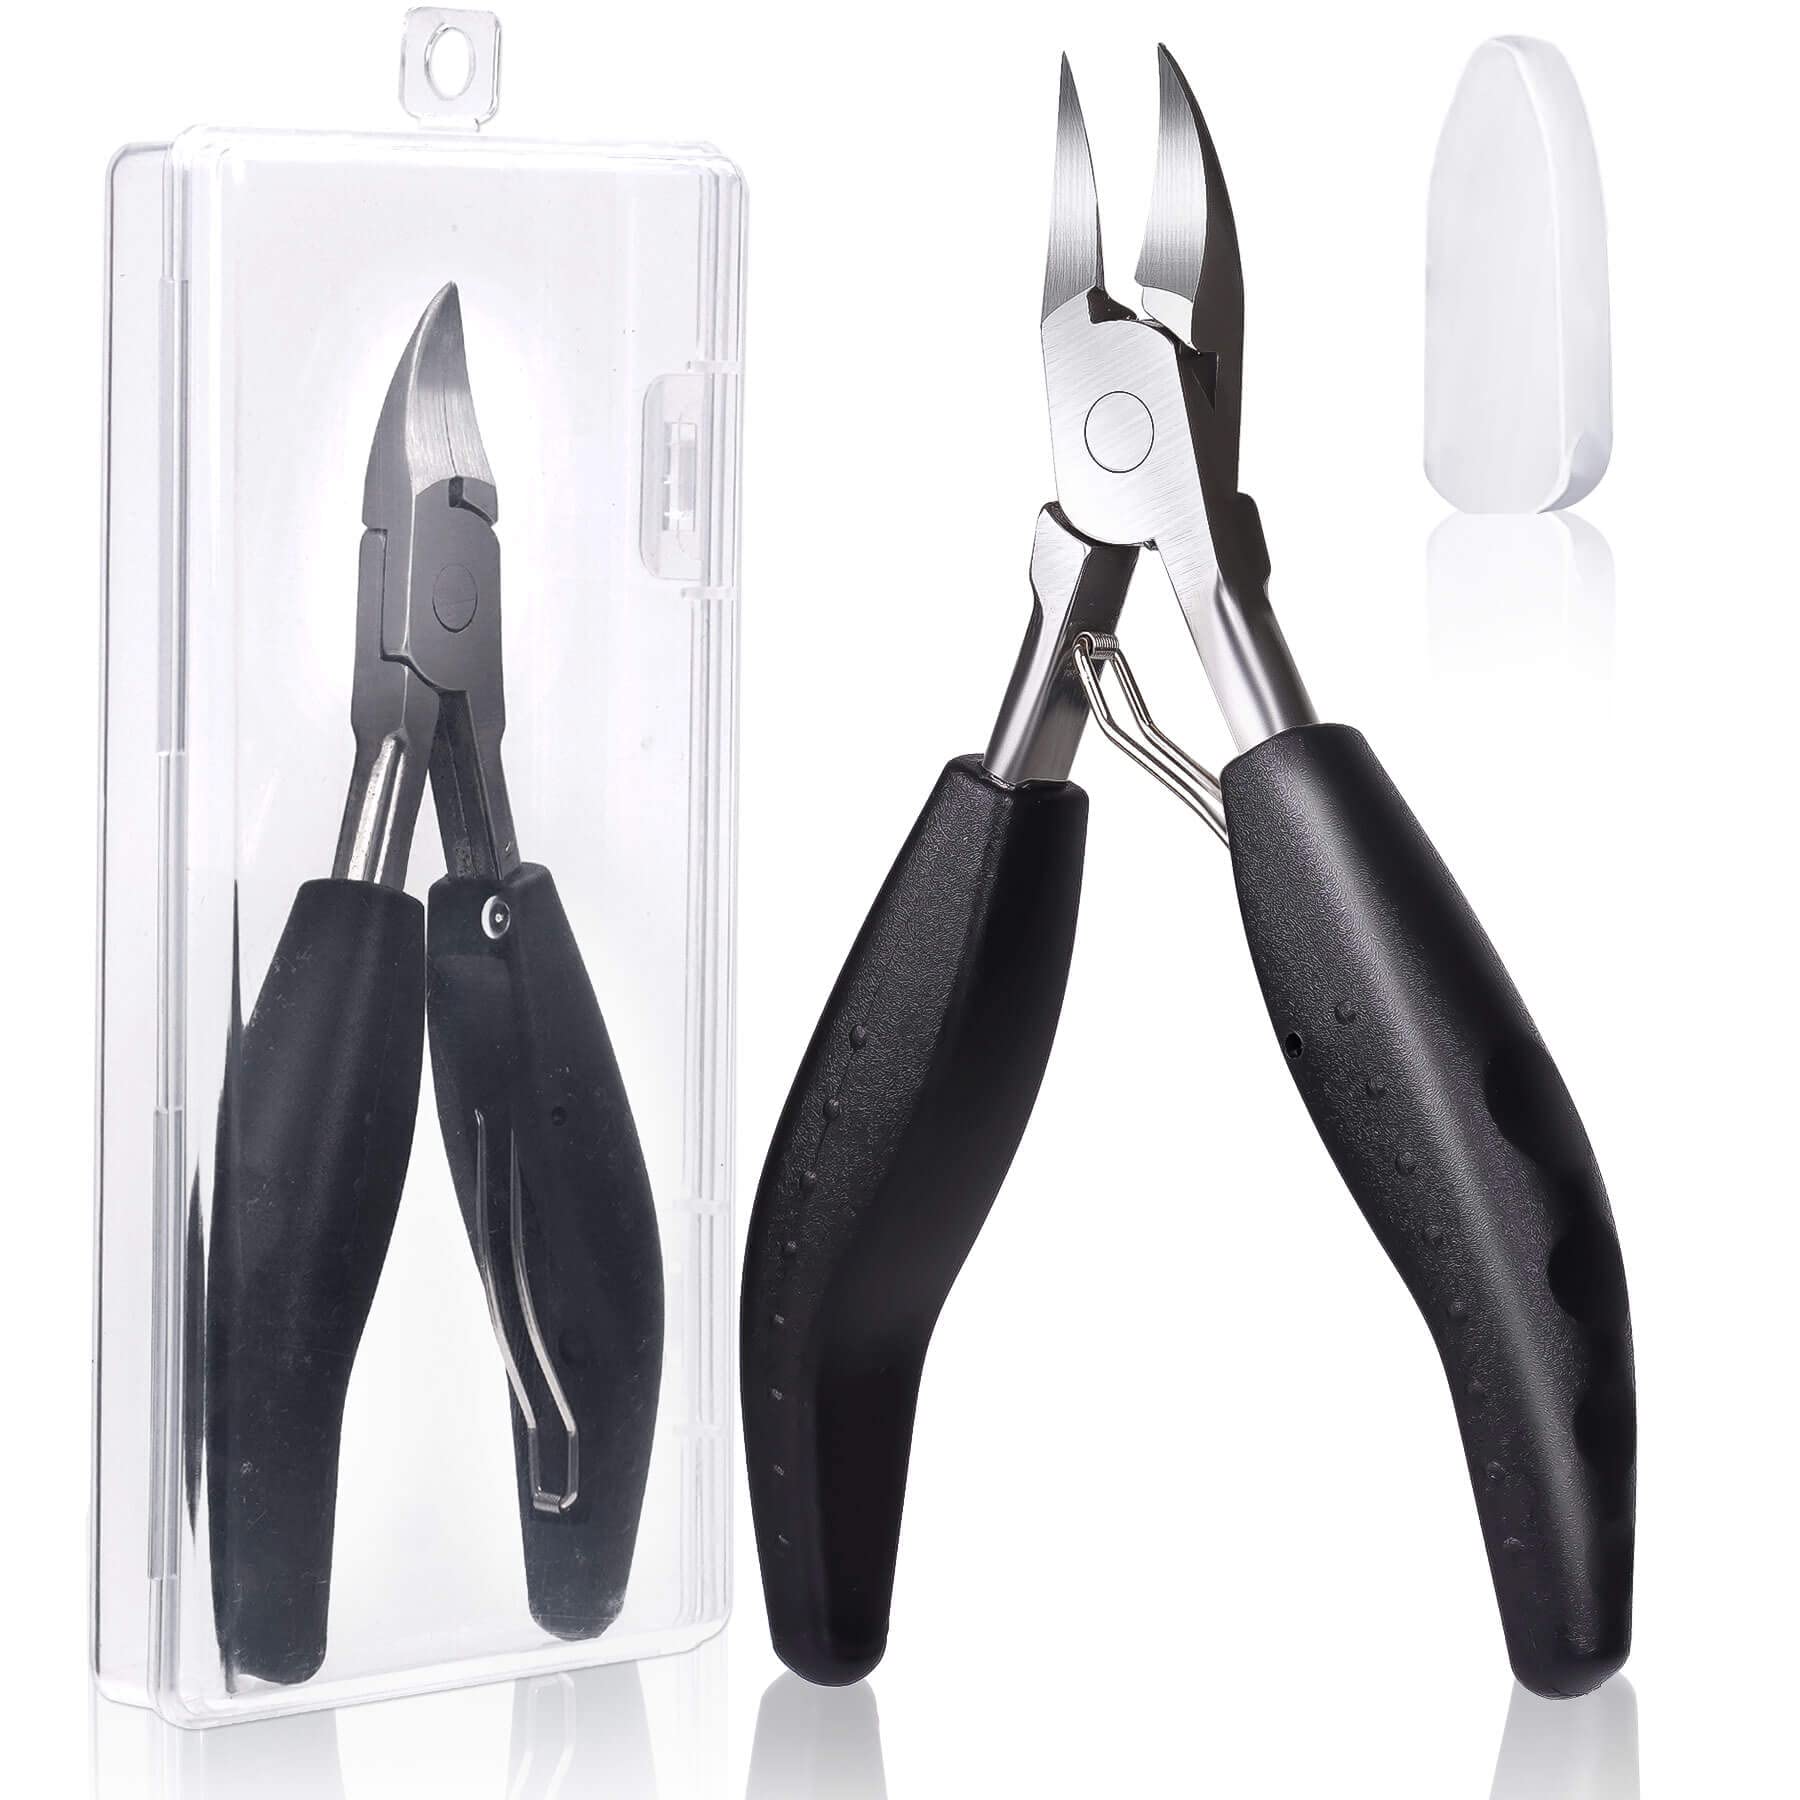 Thick Toenail Clippers Nail Clippers for Ingrown Toenails